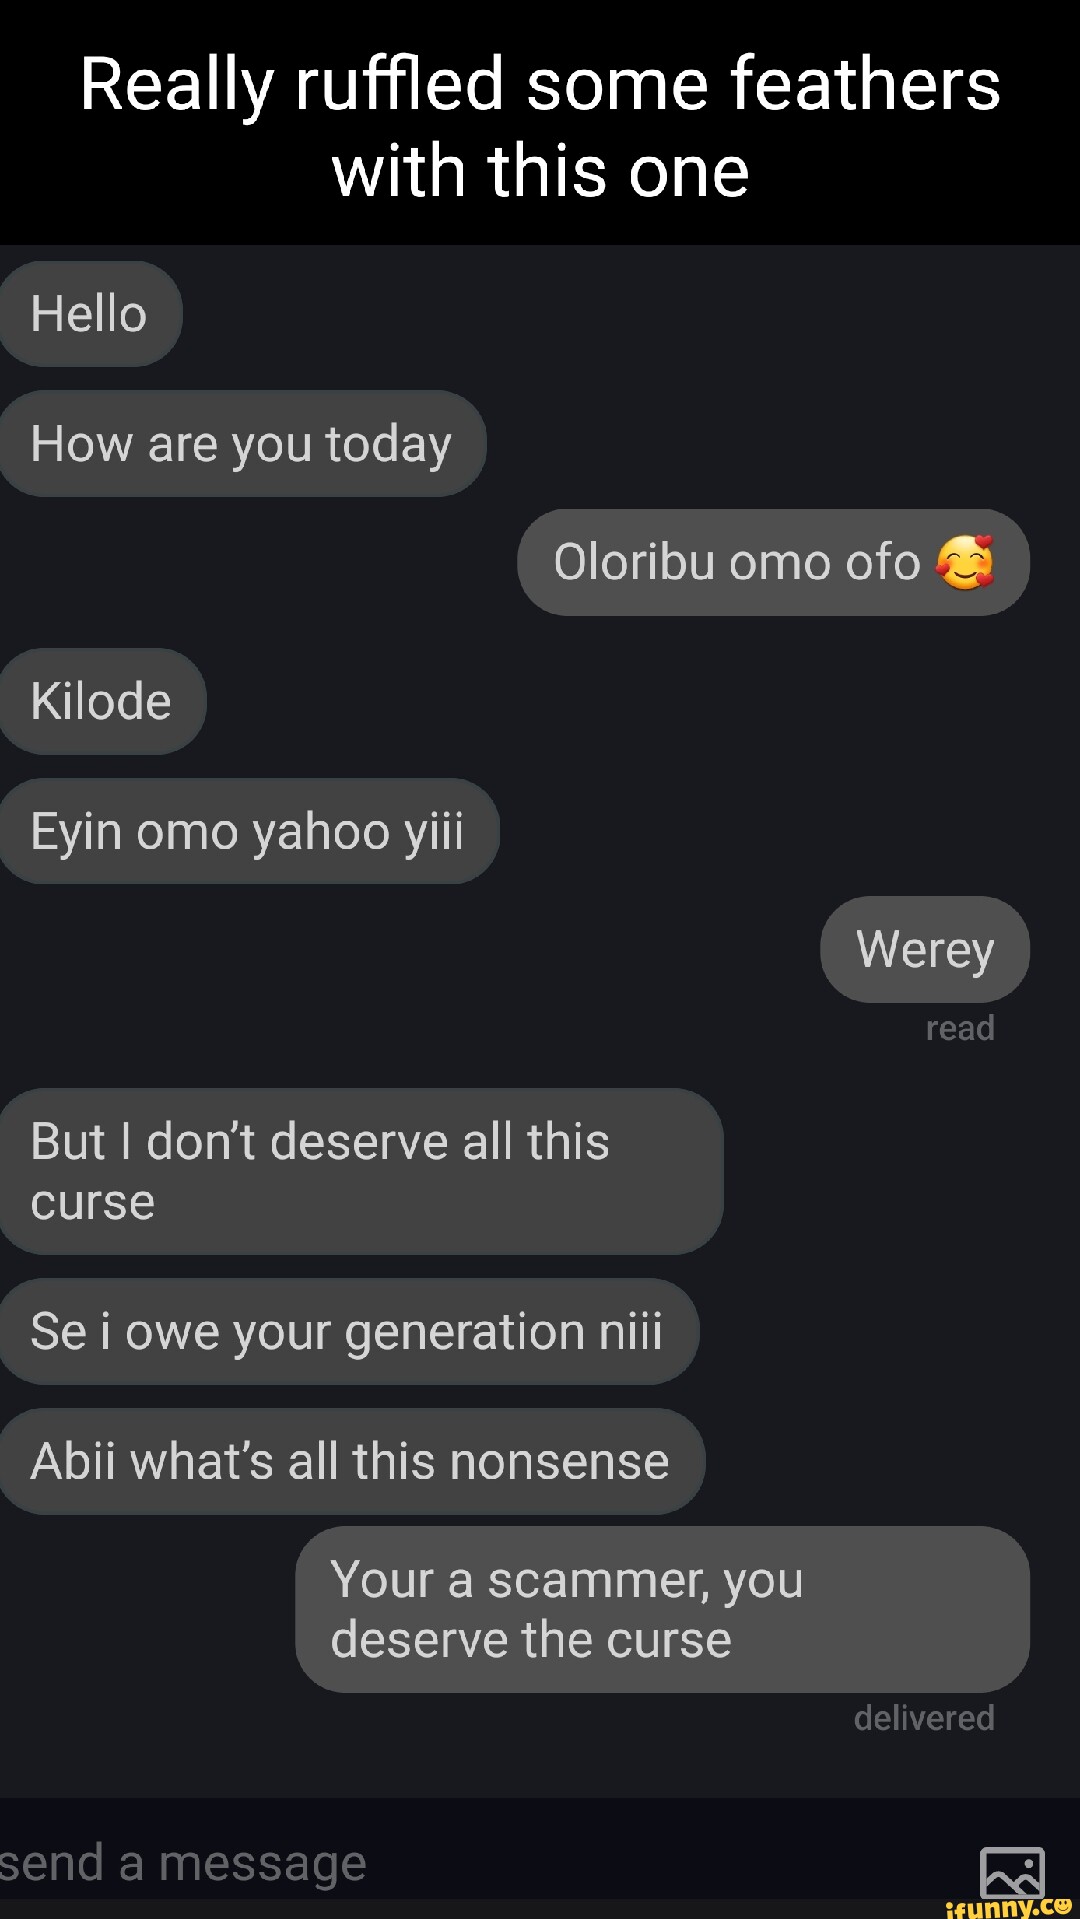 Lolz Pls what's the meaning of wehrey Guess is Yoruba? So